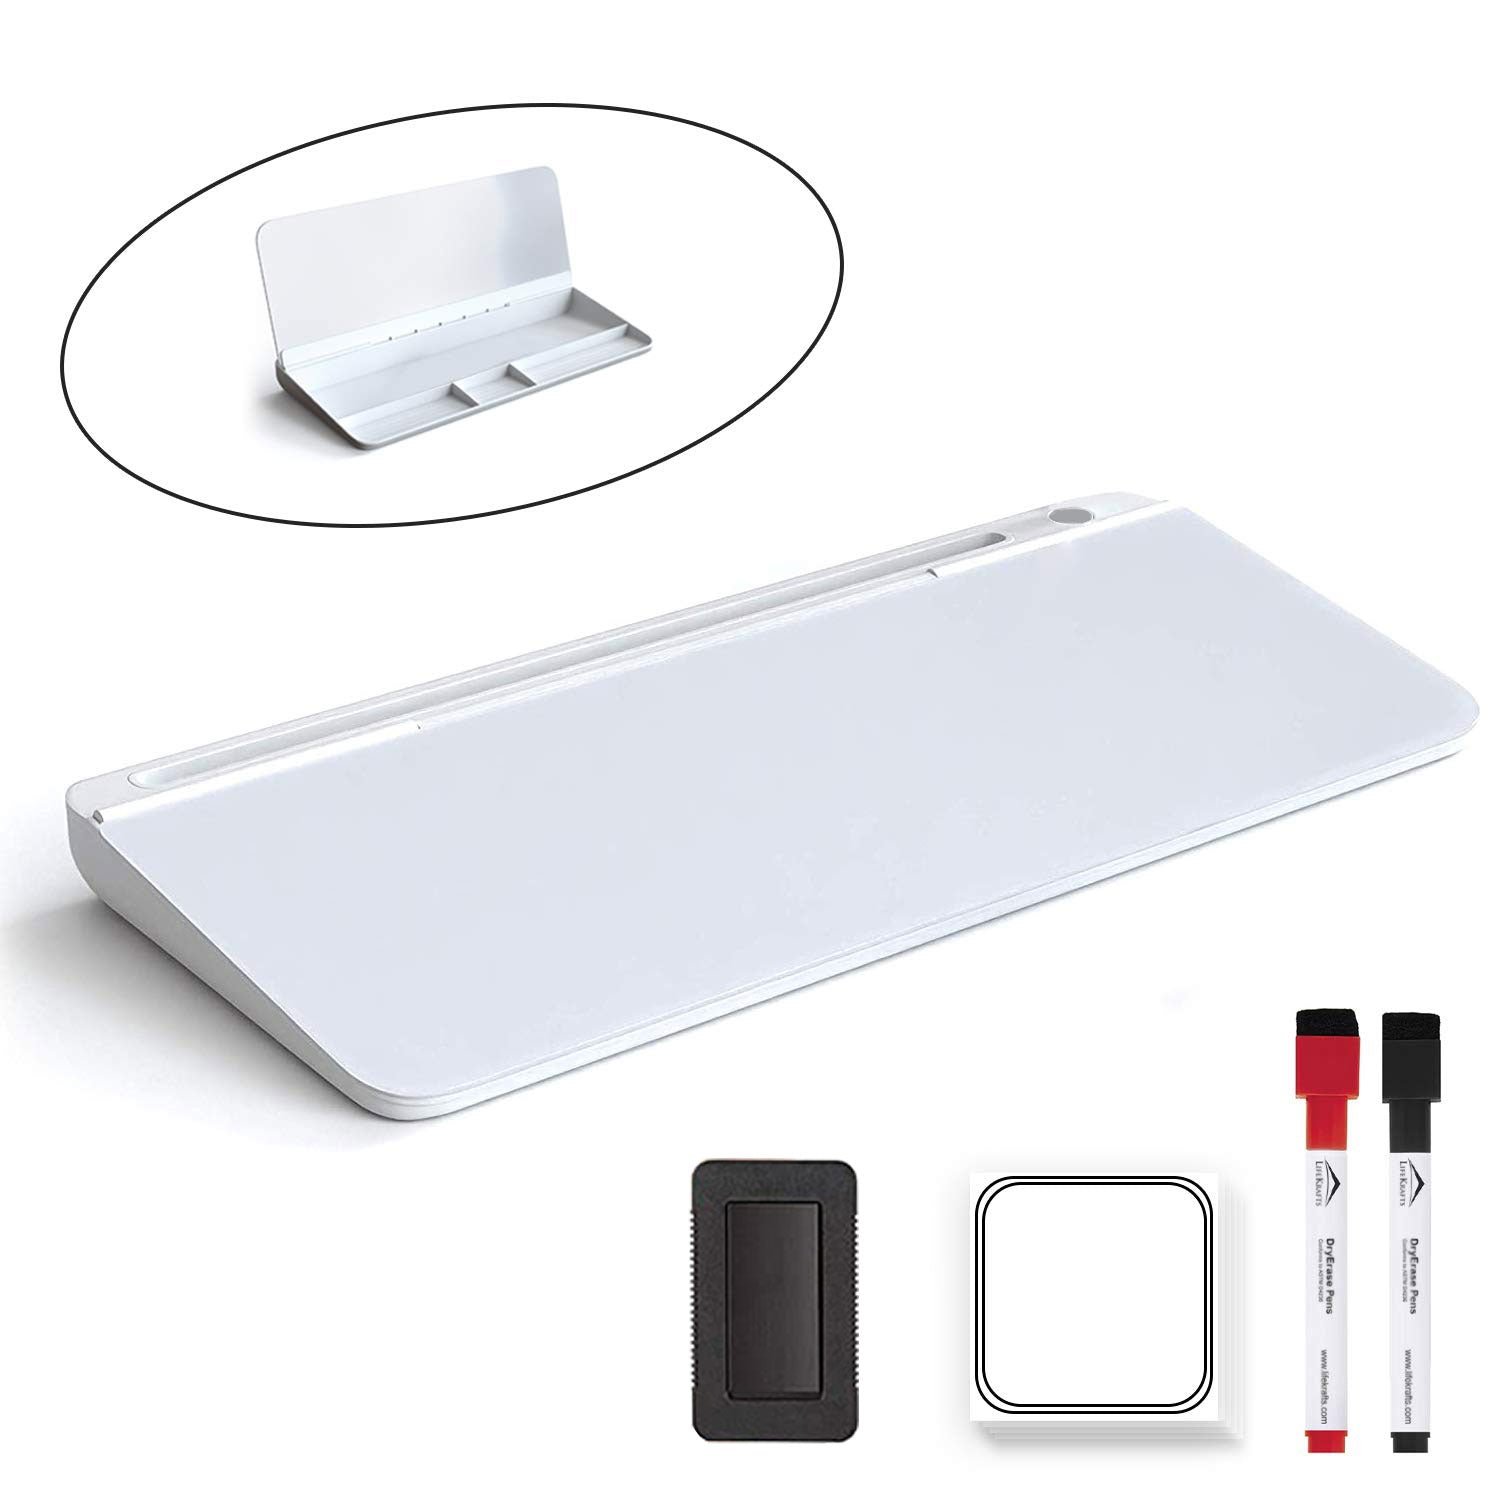 Glass Desktop Table Top Board, (18 x 6 inches) Non Magnetic White Board with bottom storage